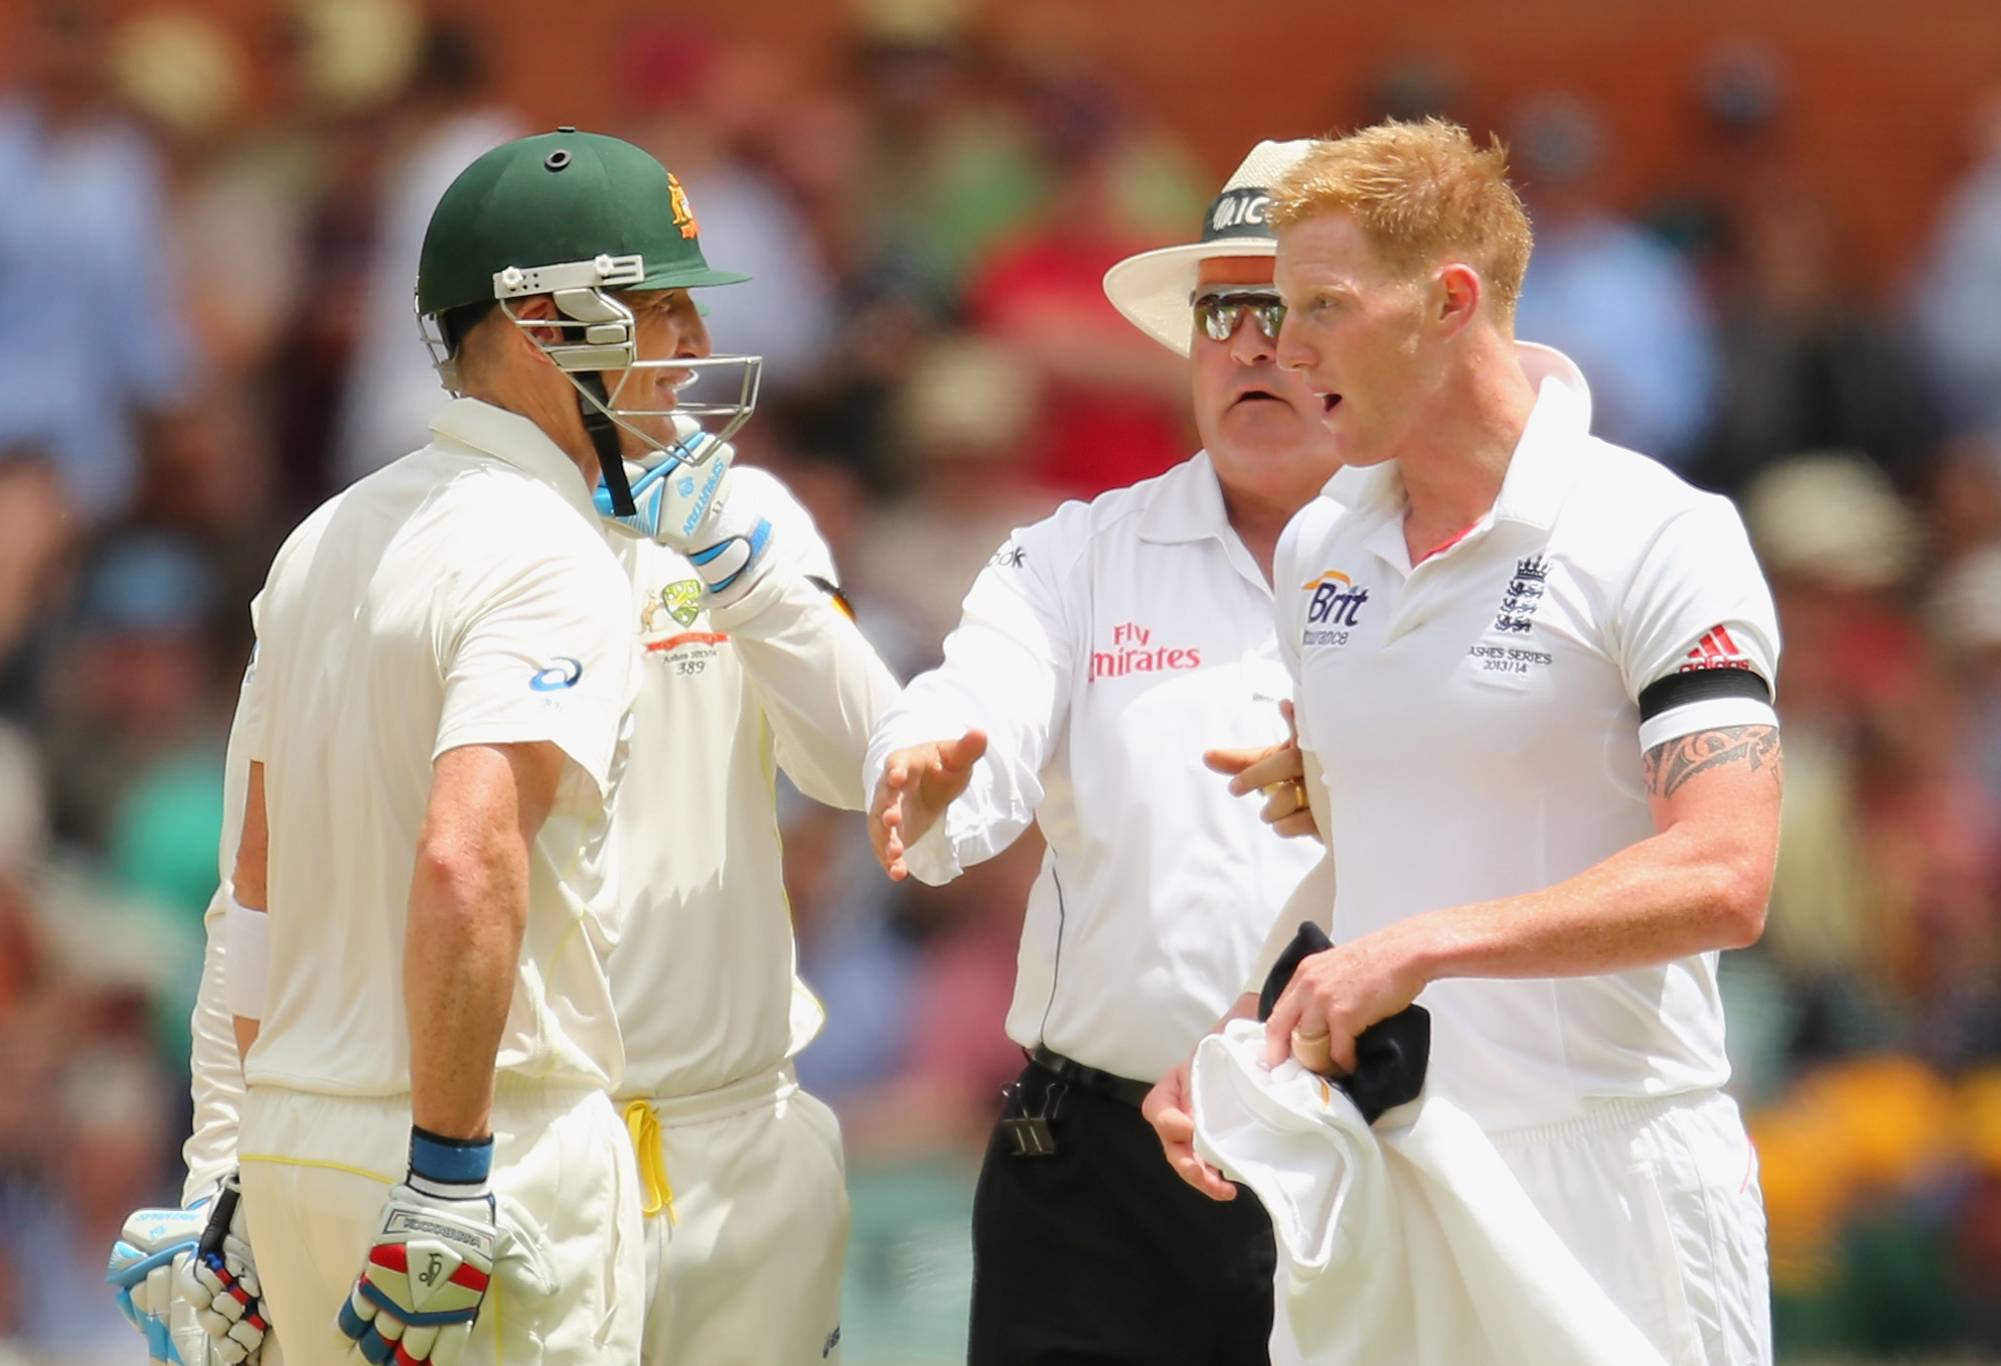 ADELAIDE, AUSTRALIA - DECEMBER 06: Brad Haddin of Australia and Ben Stokes of England exchange words as umpire Marais Erasmus steps between them during day two of the Second Ashes Test Match between Australia and England at Adelaide Oval on December 6, 2013 in Adelaide, Australia. (Photo by Scott Barbour/Getty Images)